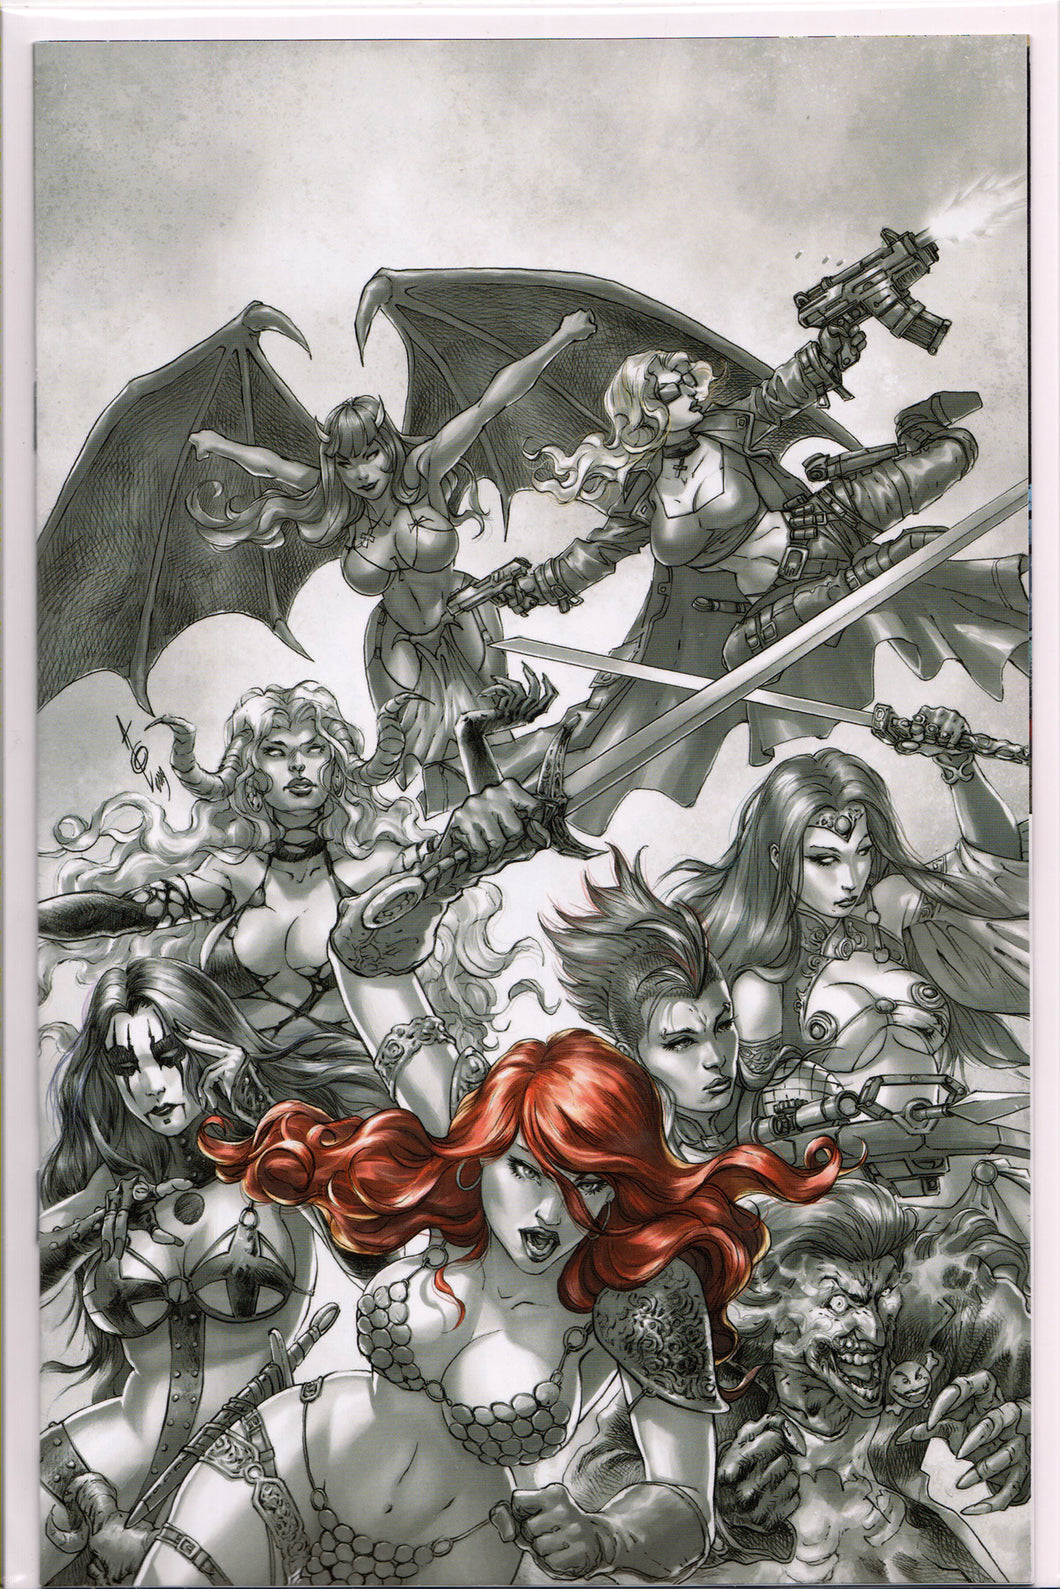 RED SONJA: AGE OF CHAOS #1 (QUAH COLOR SPOT VIRGIN VARIANT) COMIC BOOK ~ Dynamite